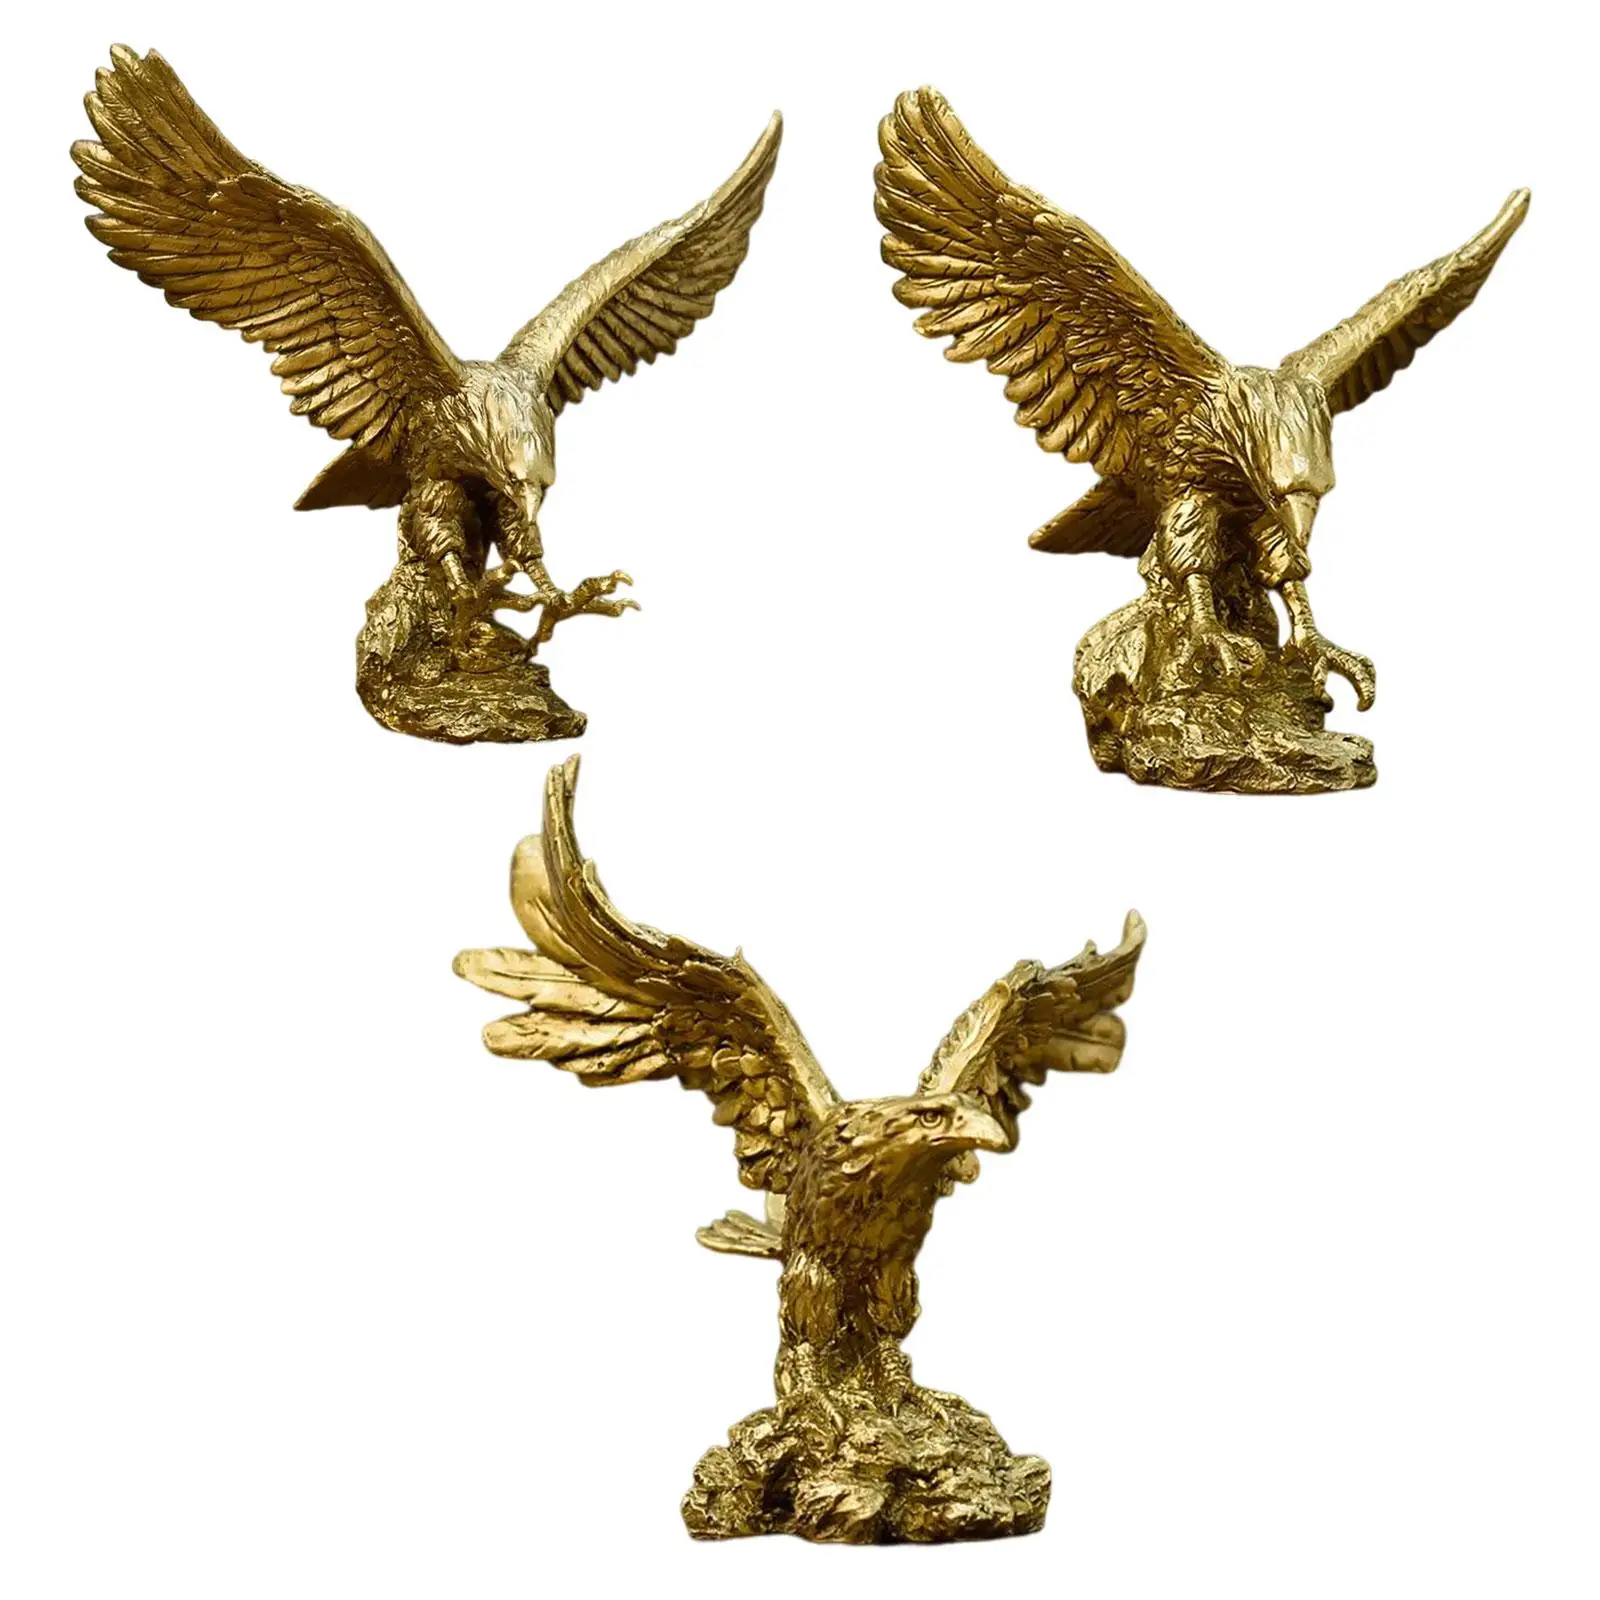 Resin Eagle Sculpture Collection Ornament Craft Animal Figurine for Table Centerpiece Restaurant Dining Room Home Decor